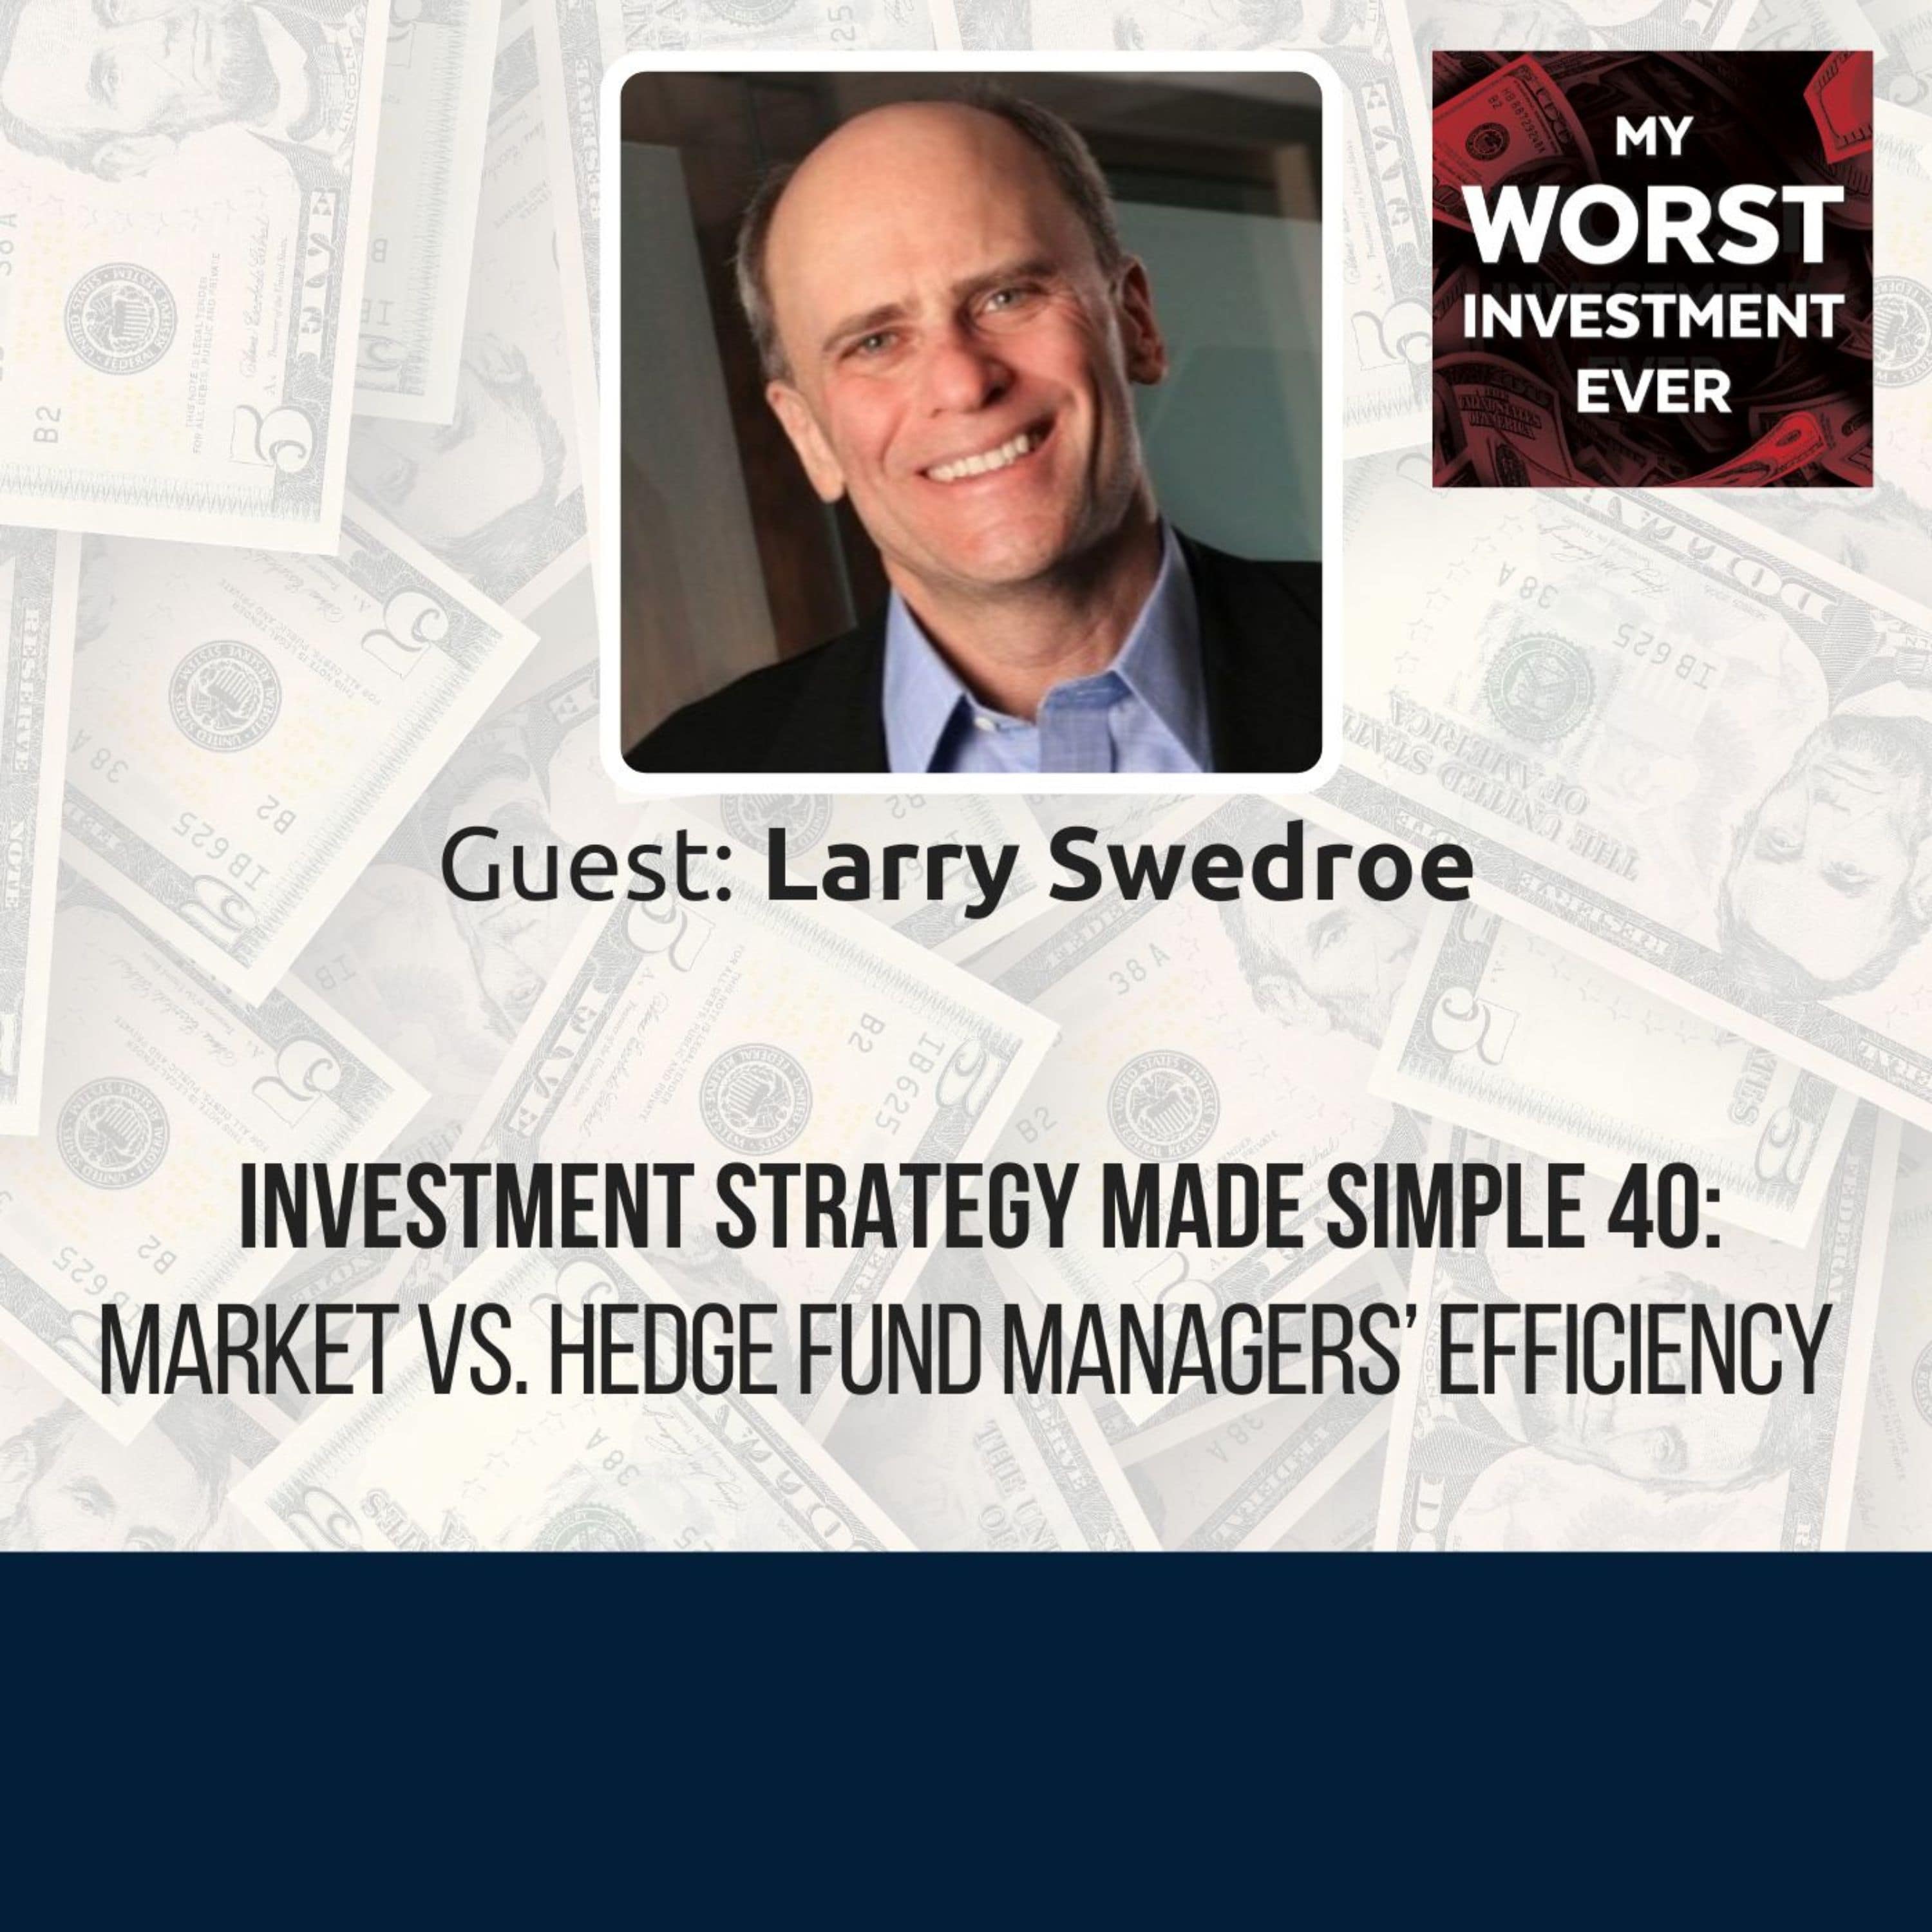 ISMS 40: Larry Swedroe – Market vs. Hedge Fund Managers’ Efficiency